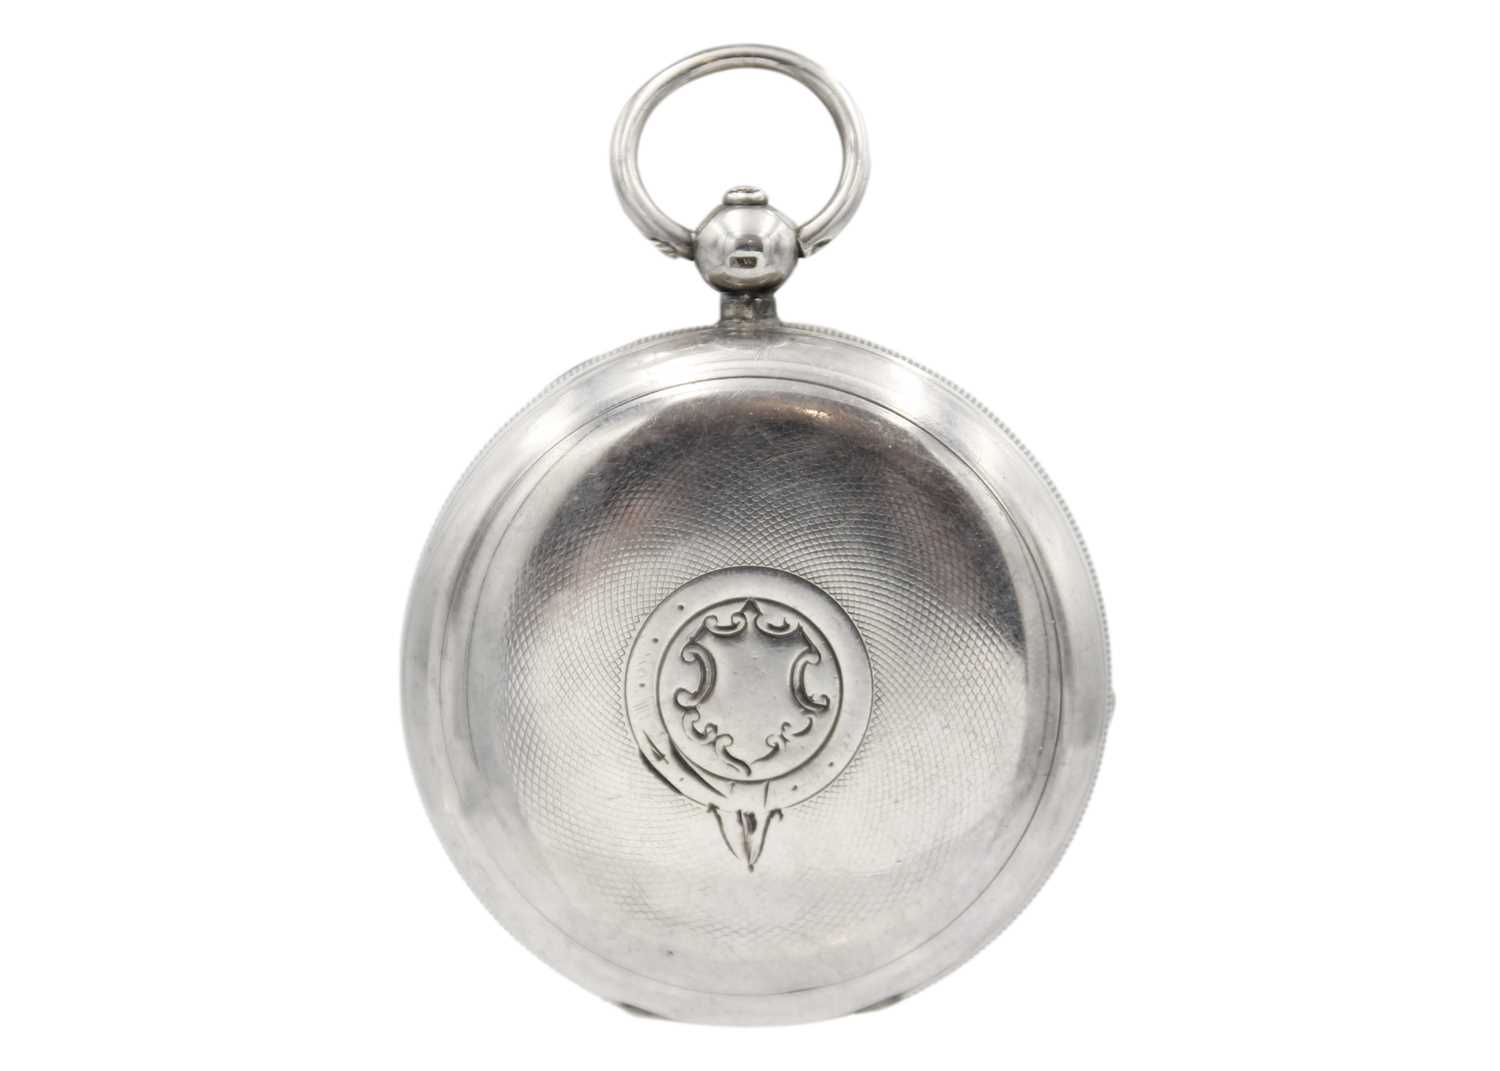 Two American Watch Co. Waltham silver-cased key wind pocket watches. - Image 4 of 7